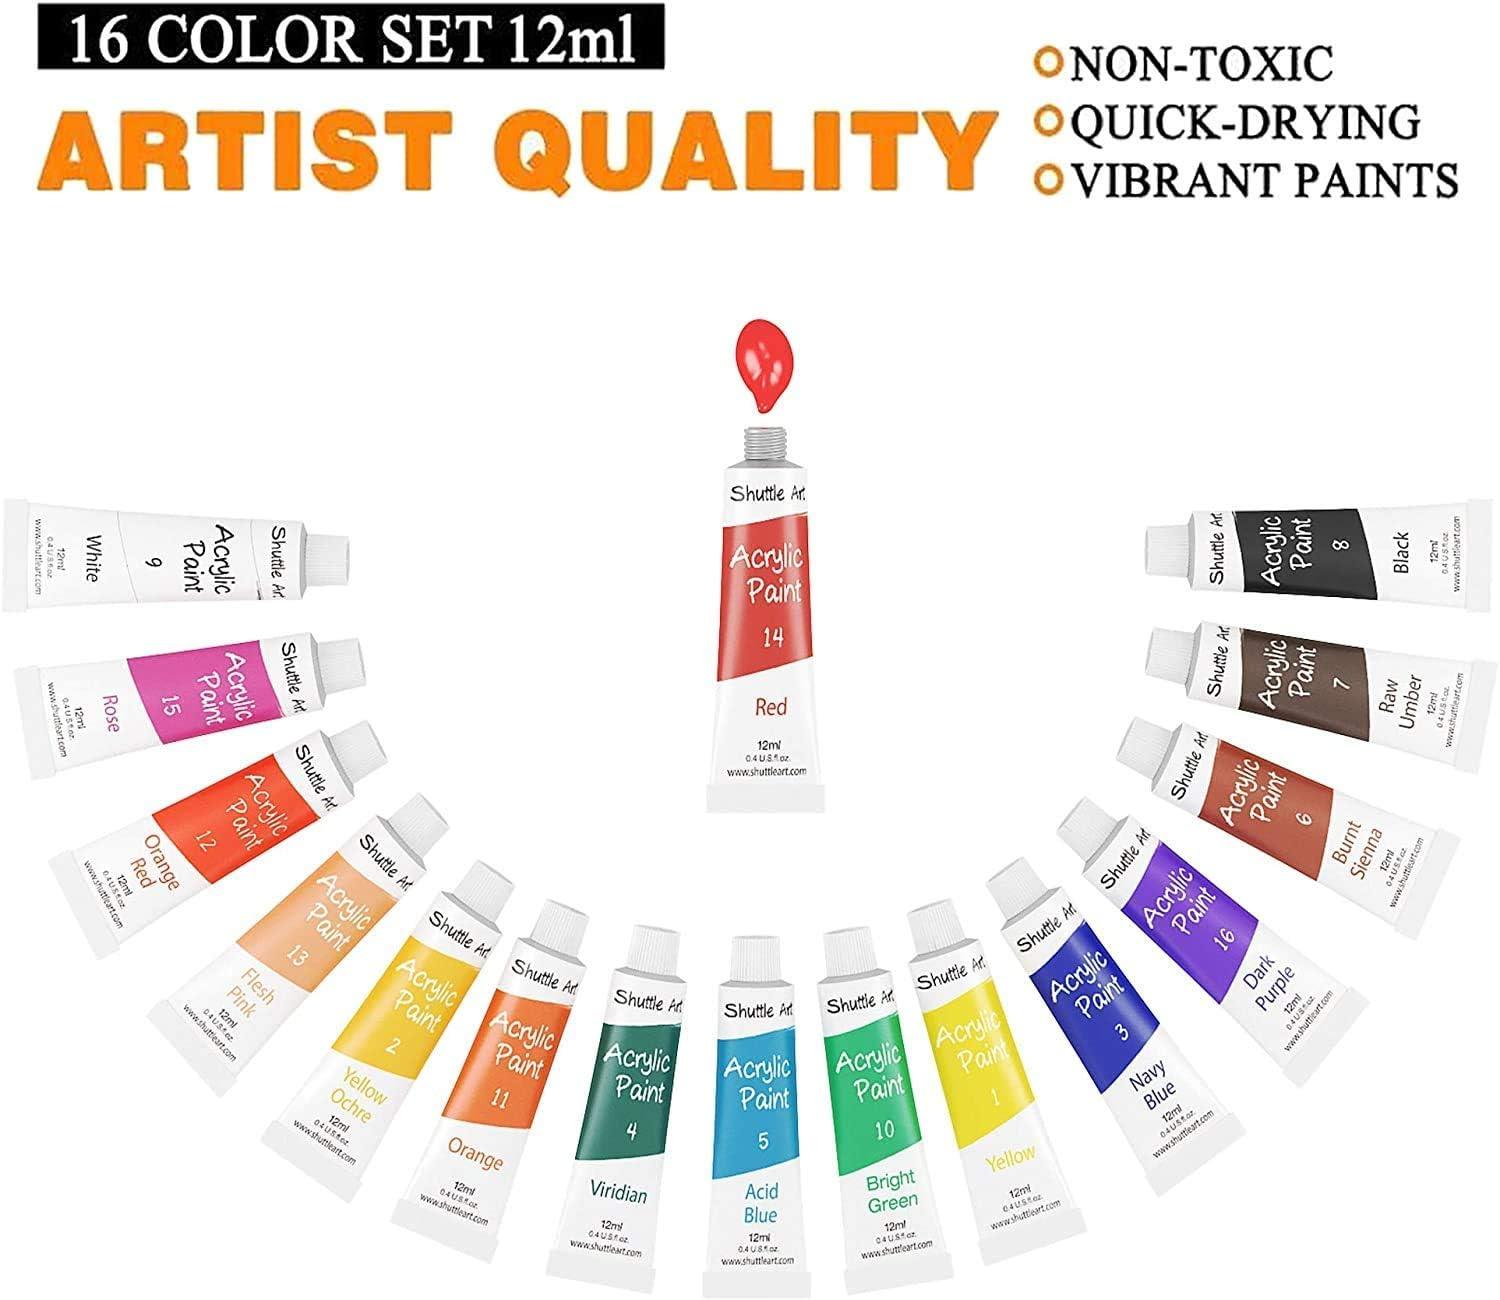 Shuttle Art Acrylic Paint Set 16 x12ml Tubes Artist Quality Non Toxic Rich  Pigments Colors Great for Kids Adults Professional Painting on Canvas Wood  Clay Fabric Ceramic Crafts 16 Colors With 3 Brushes